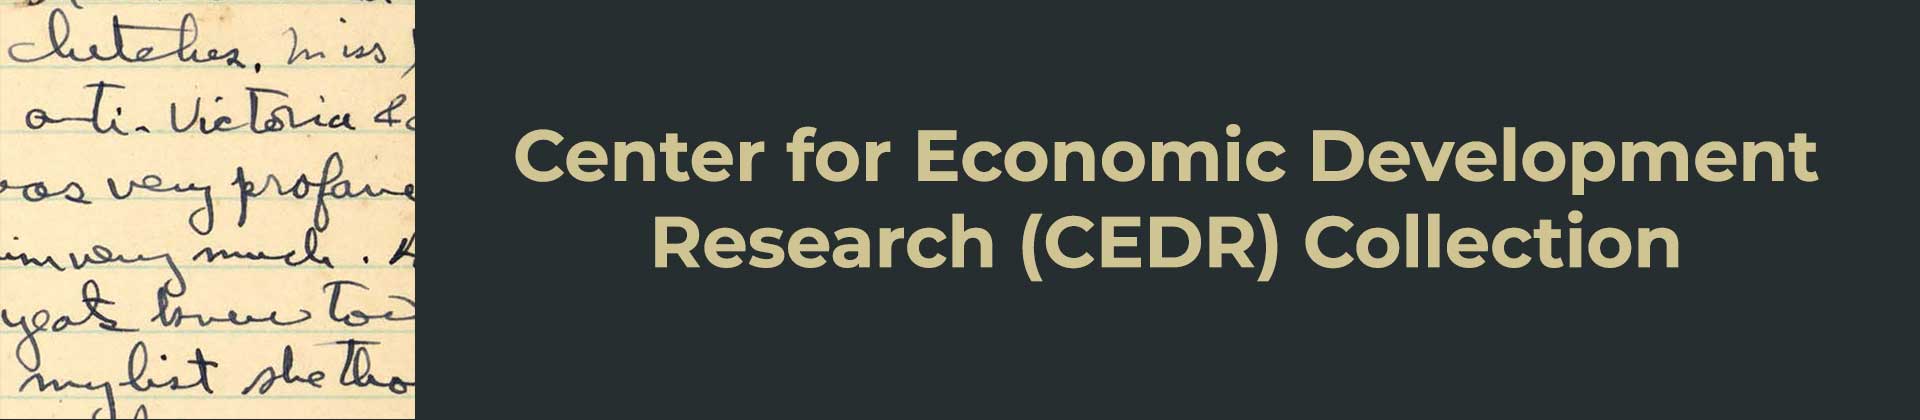 Center for Economic Development Research (CEDR) Collection